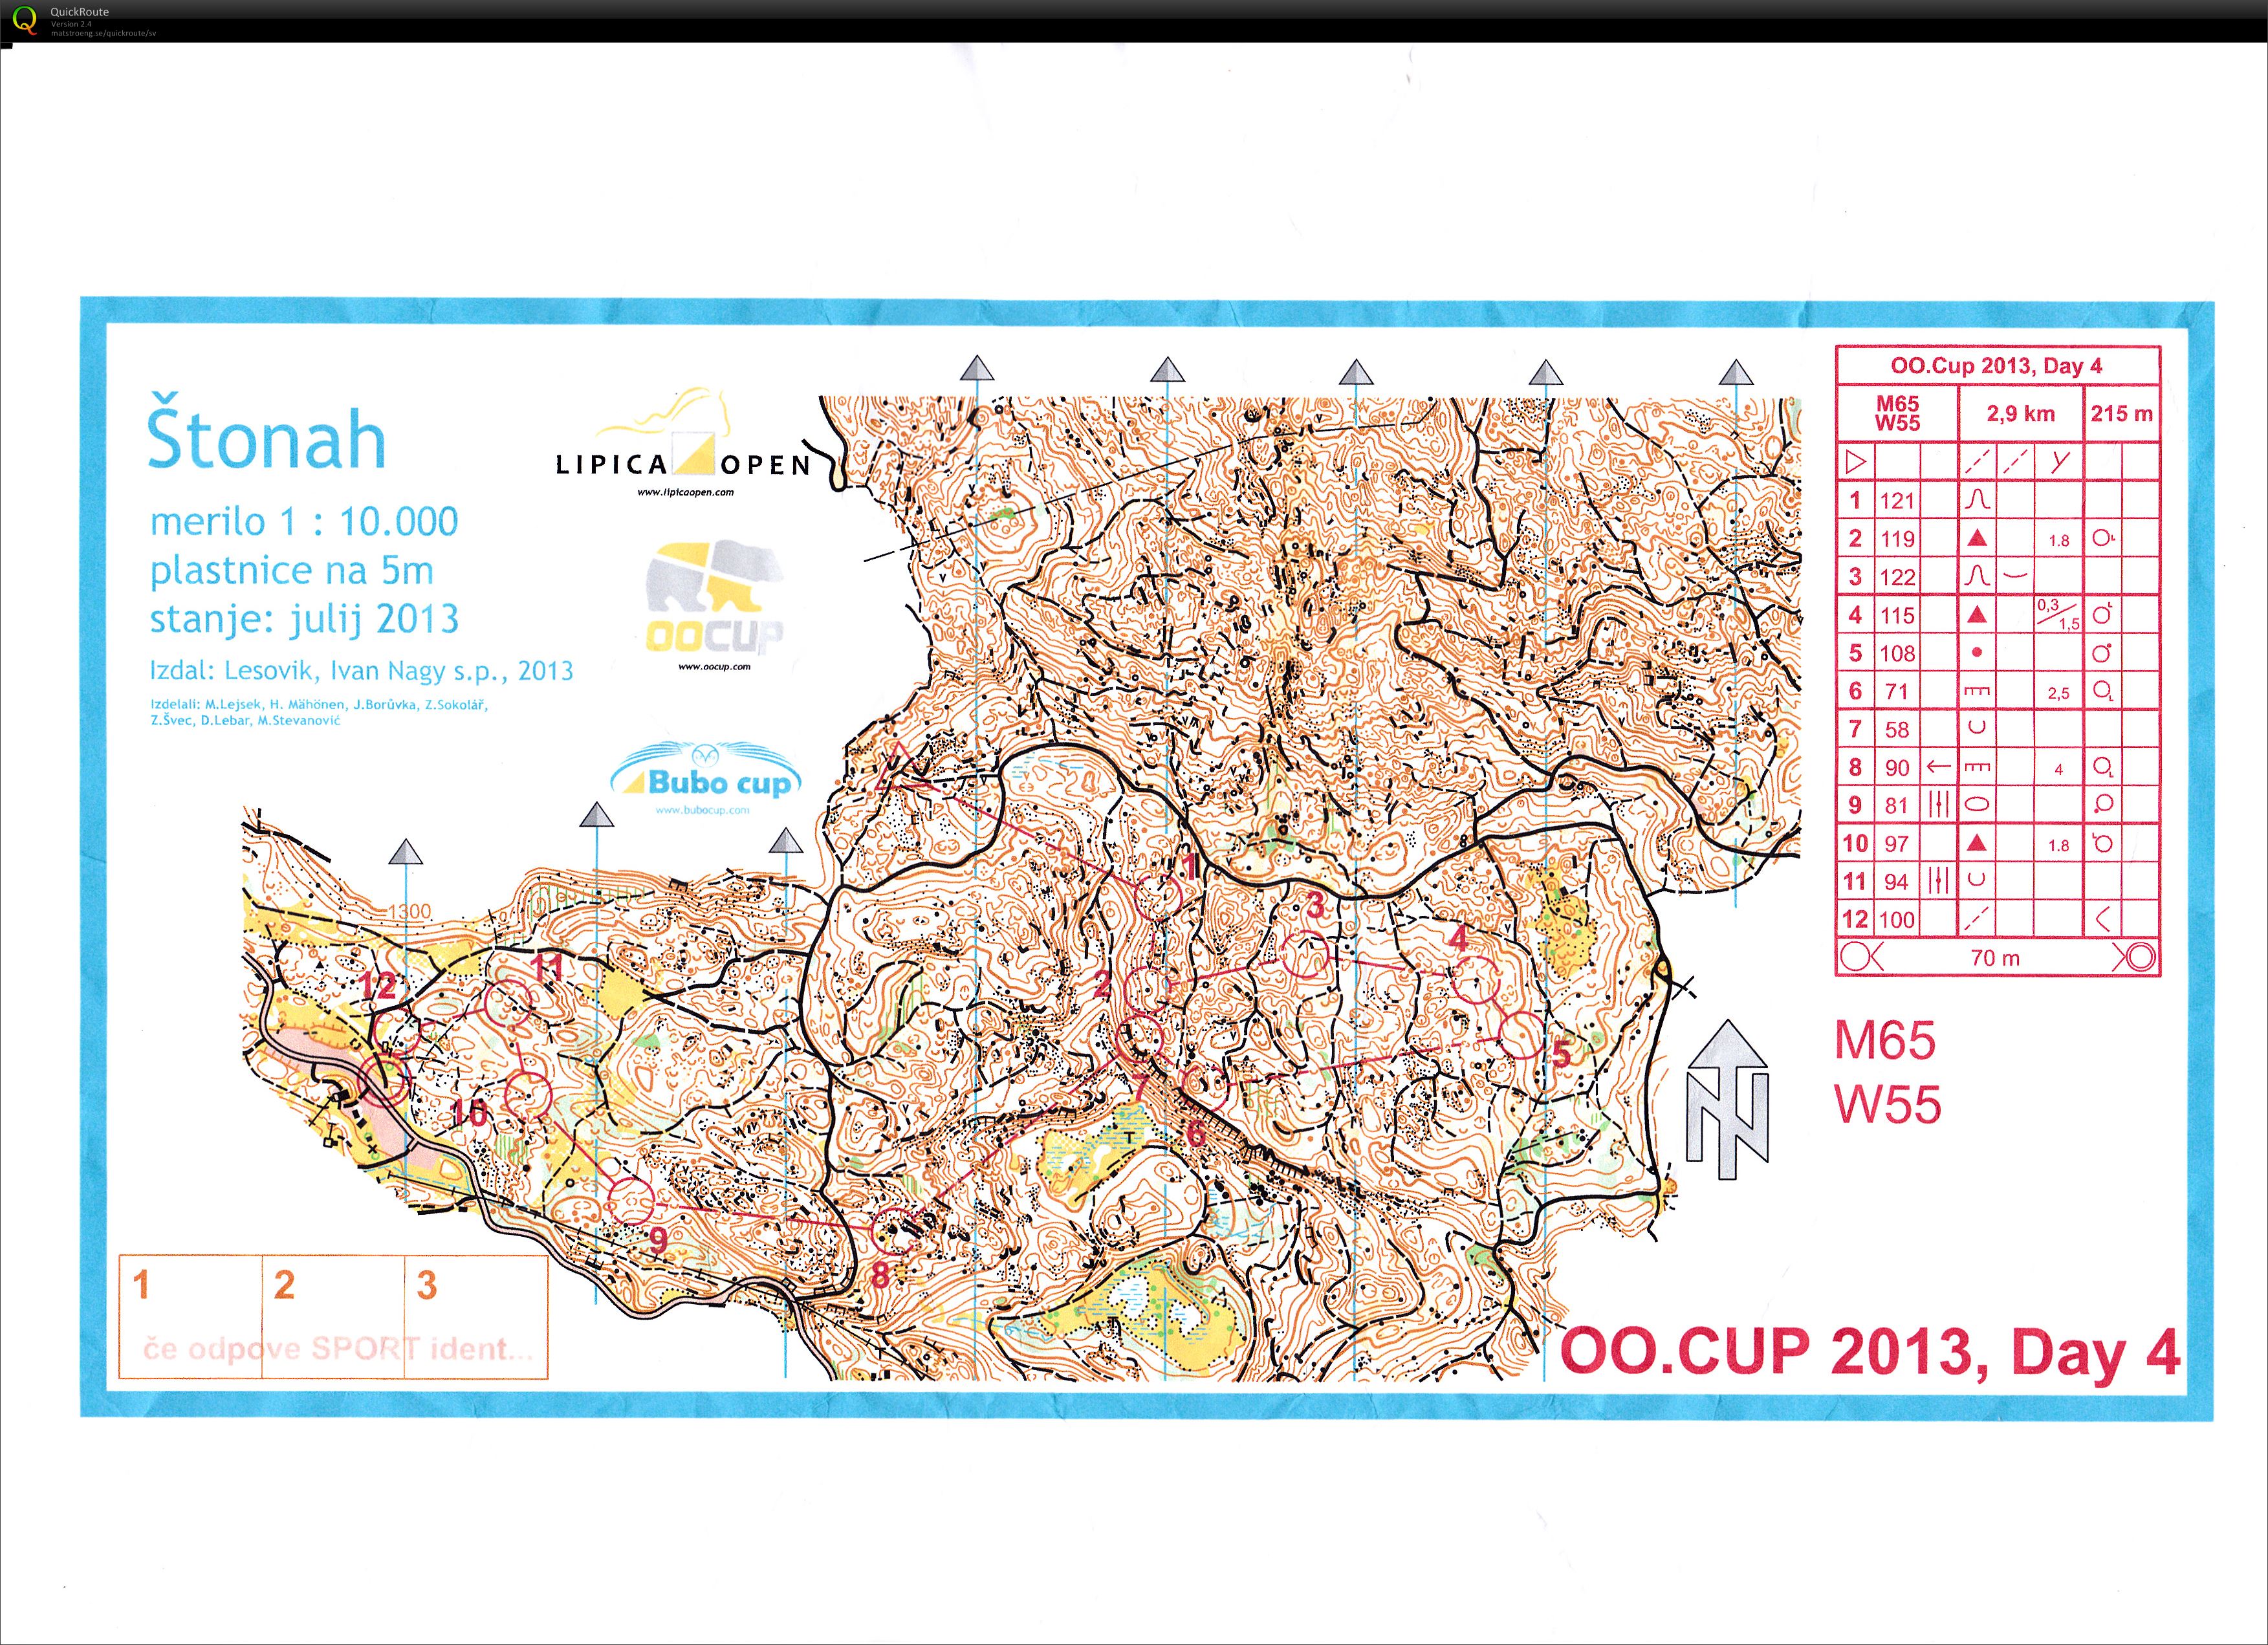 OOCup 2013 Stage 4 (29/07/2013)